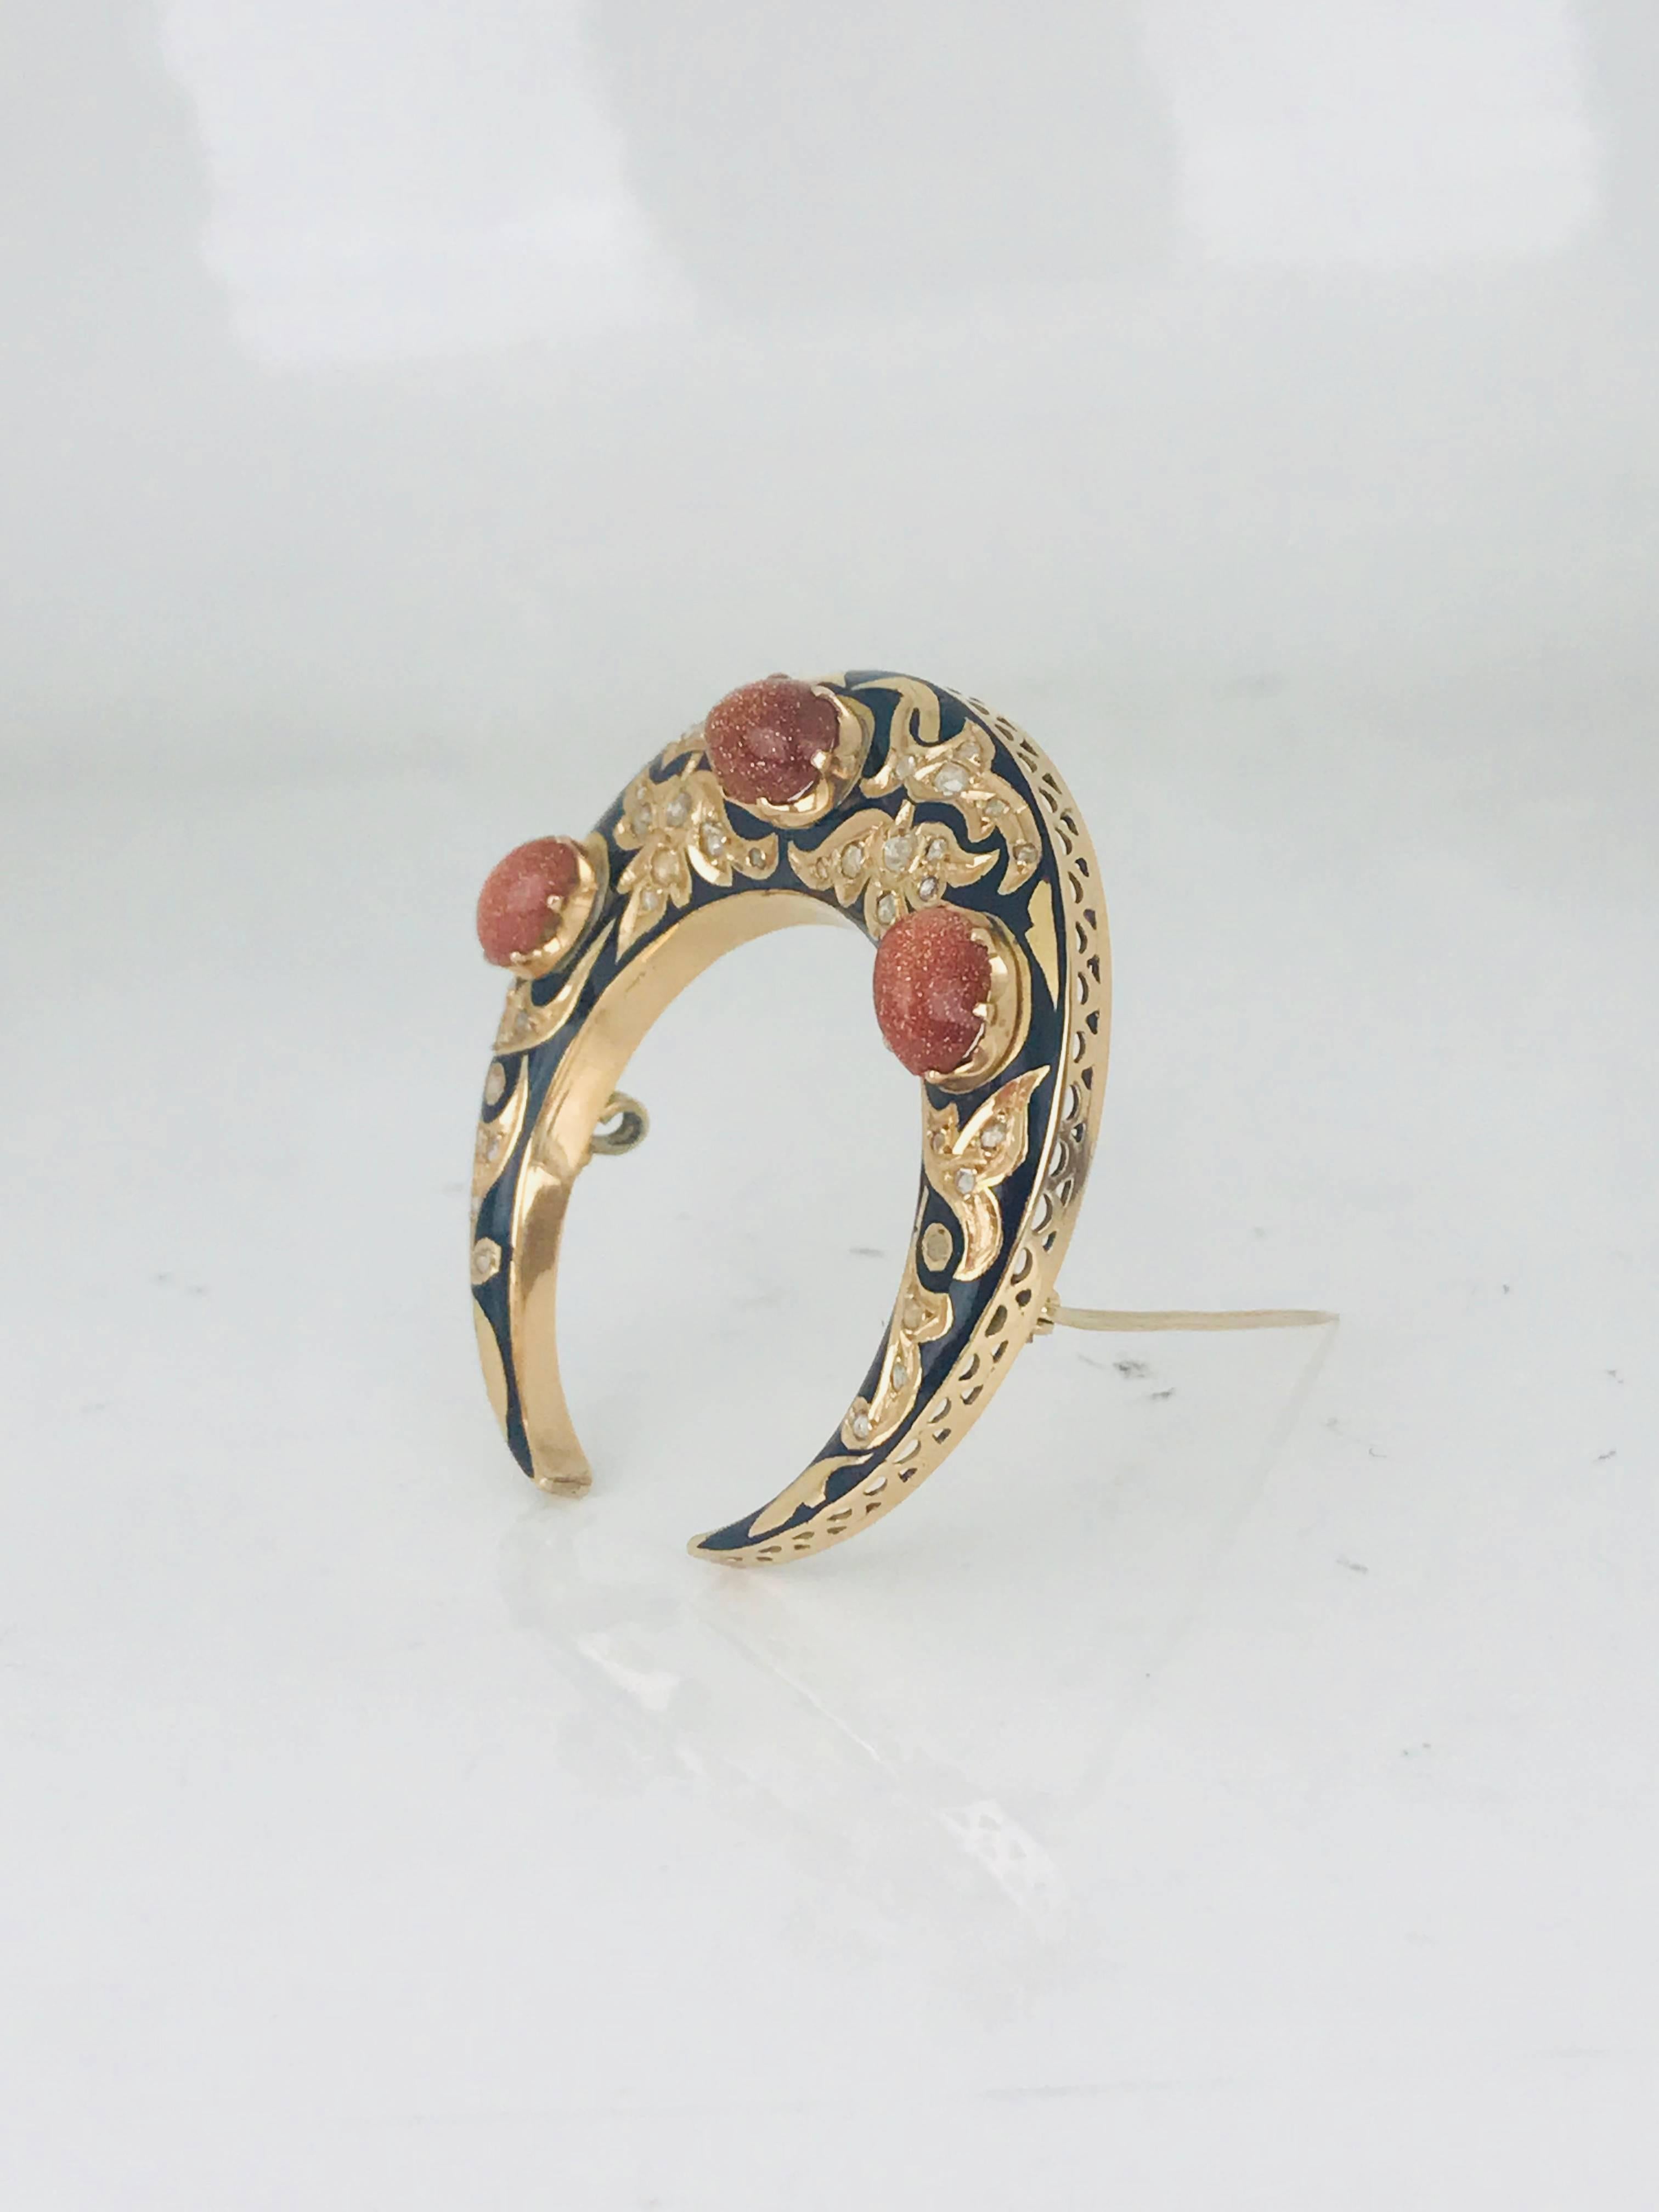 18 karat yellow gold and Enamel, Georgian style Cresent-shaped pin featuring 3 large oval-shaped brown goldstones. Stunning rare vintage pin of beautiful workmanship features 3 large prong-set oval-shaped brown goldstones and 40 old mine cut